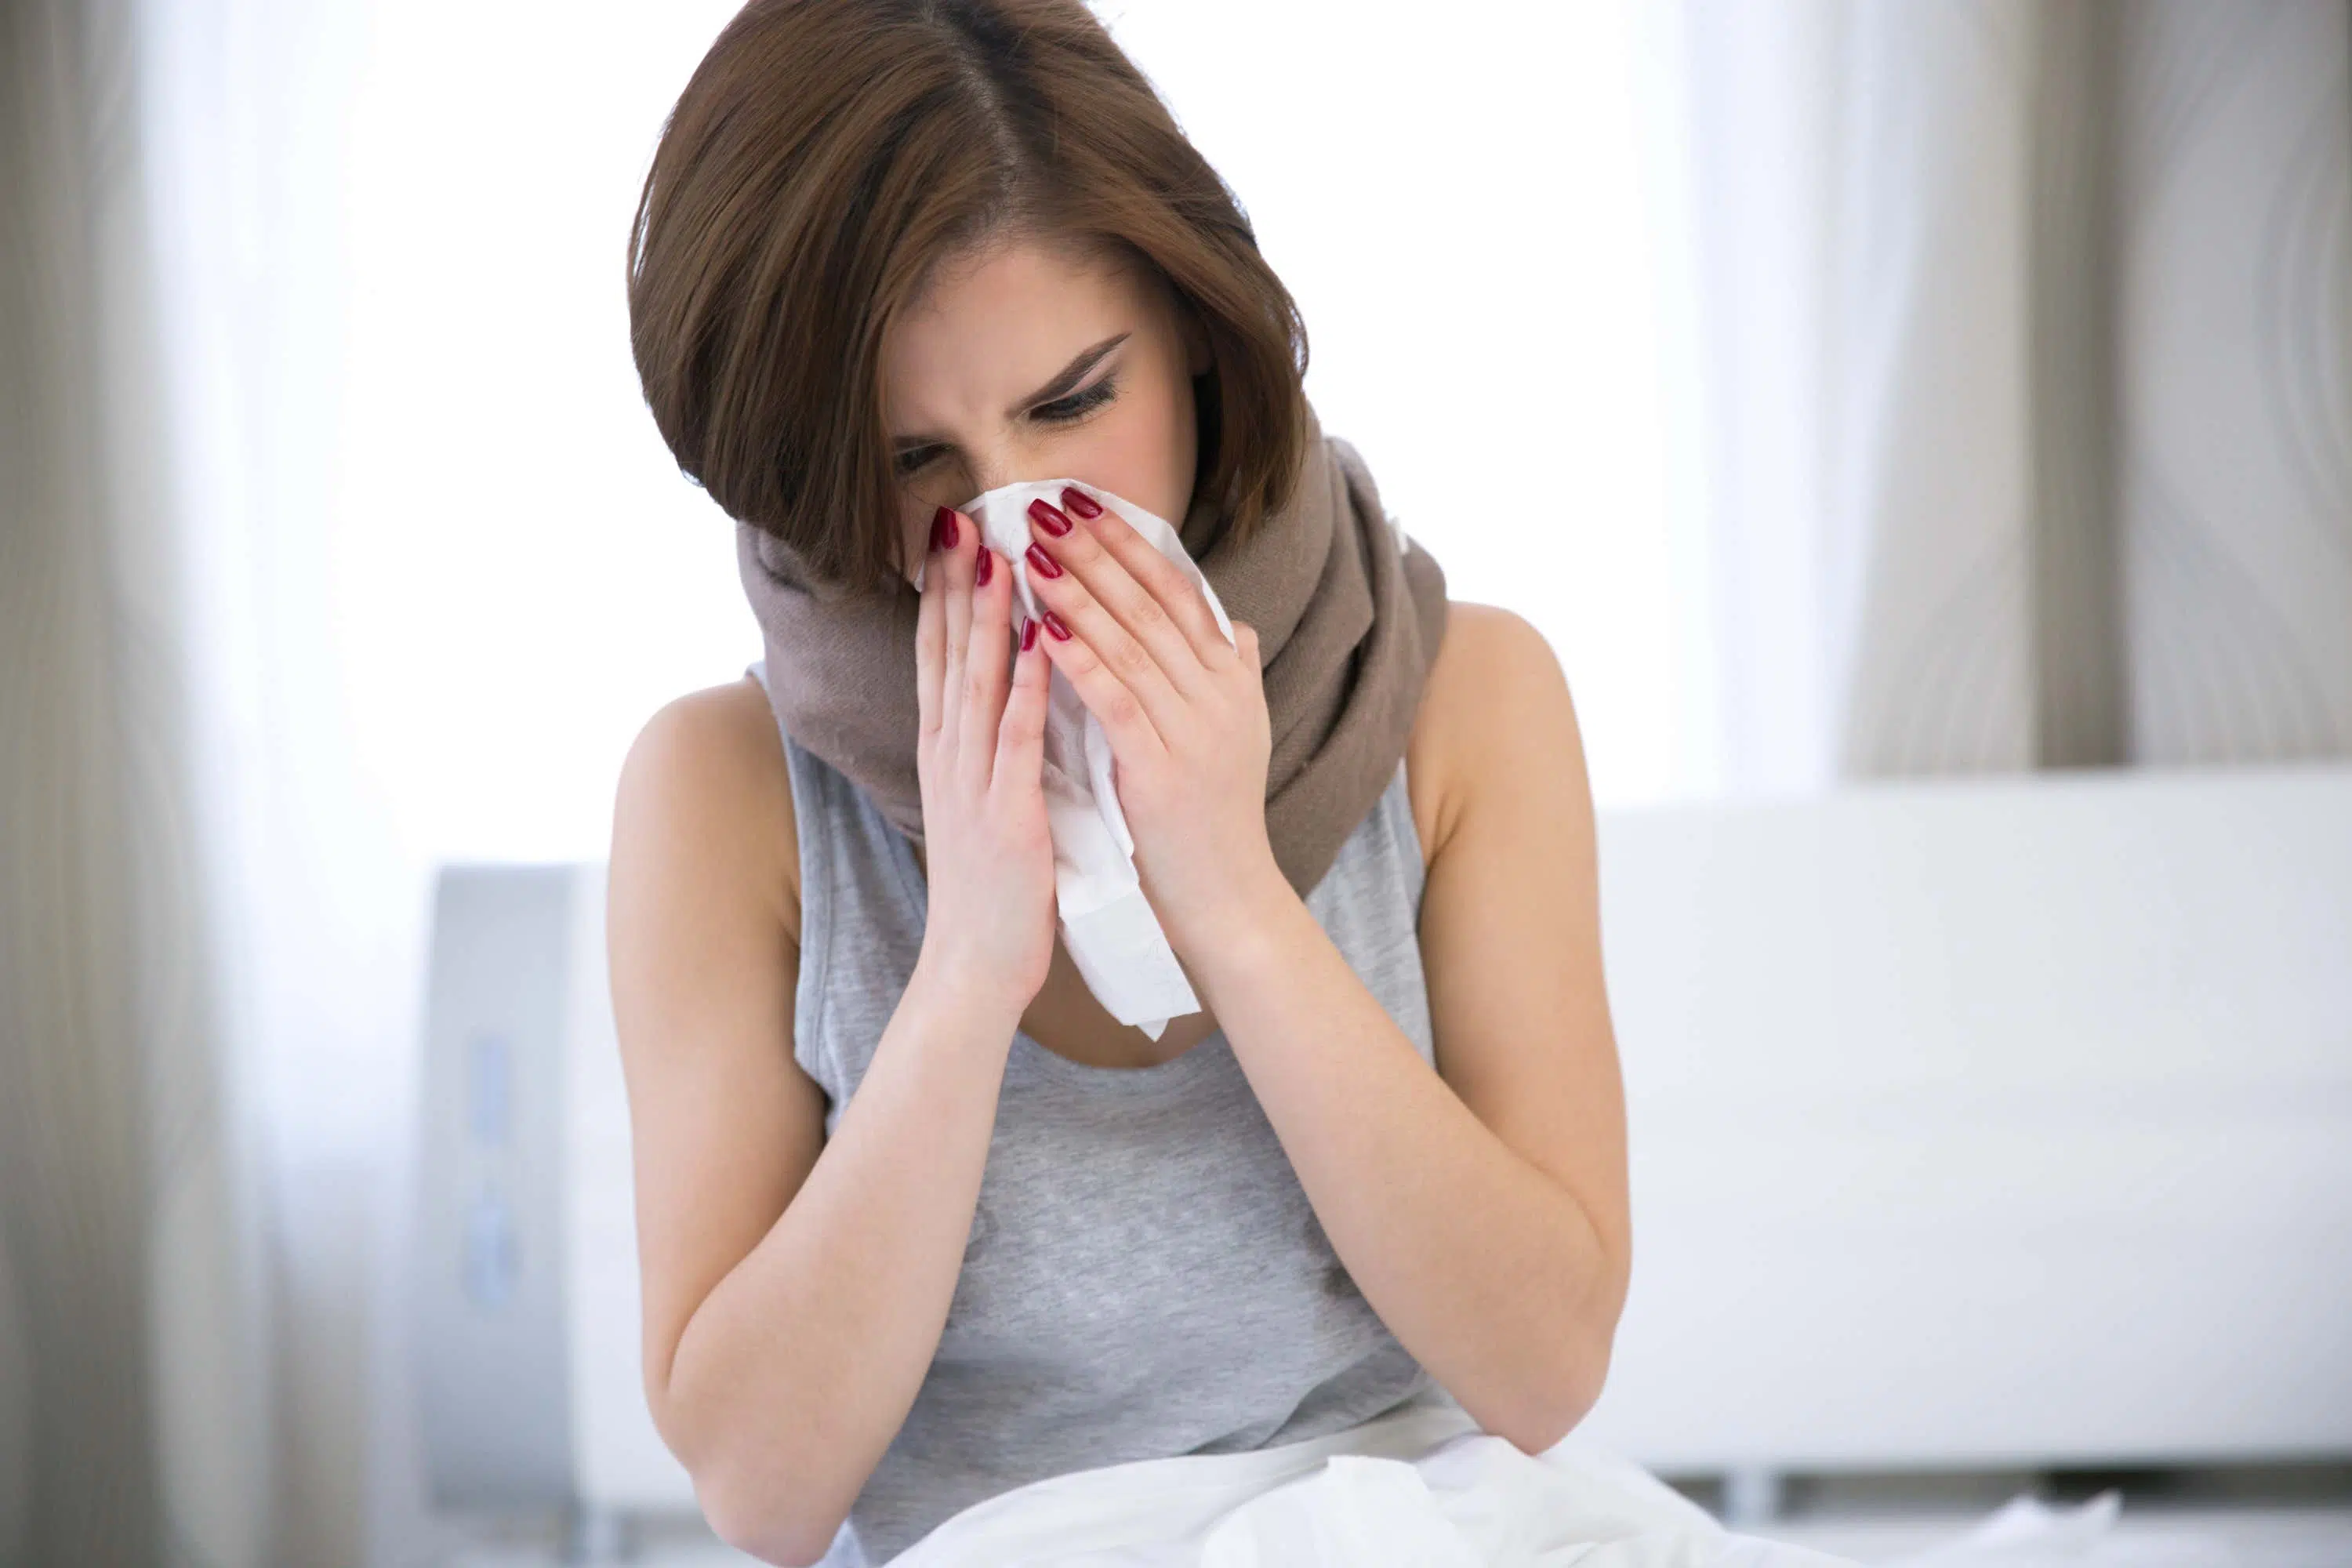 Woman blows nose into tissue scaled